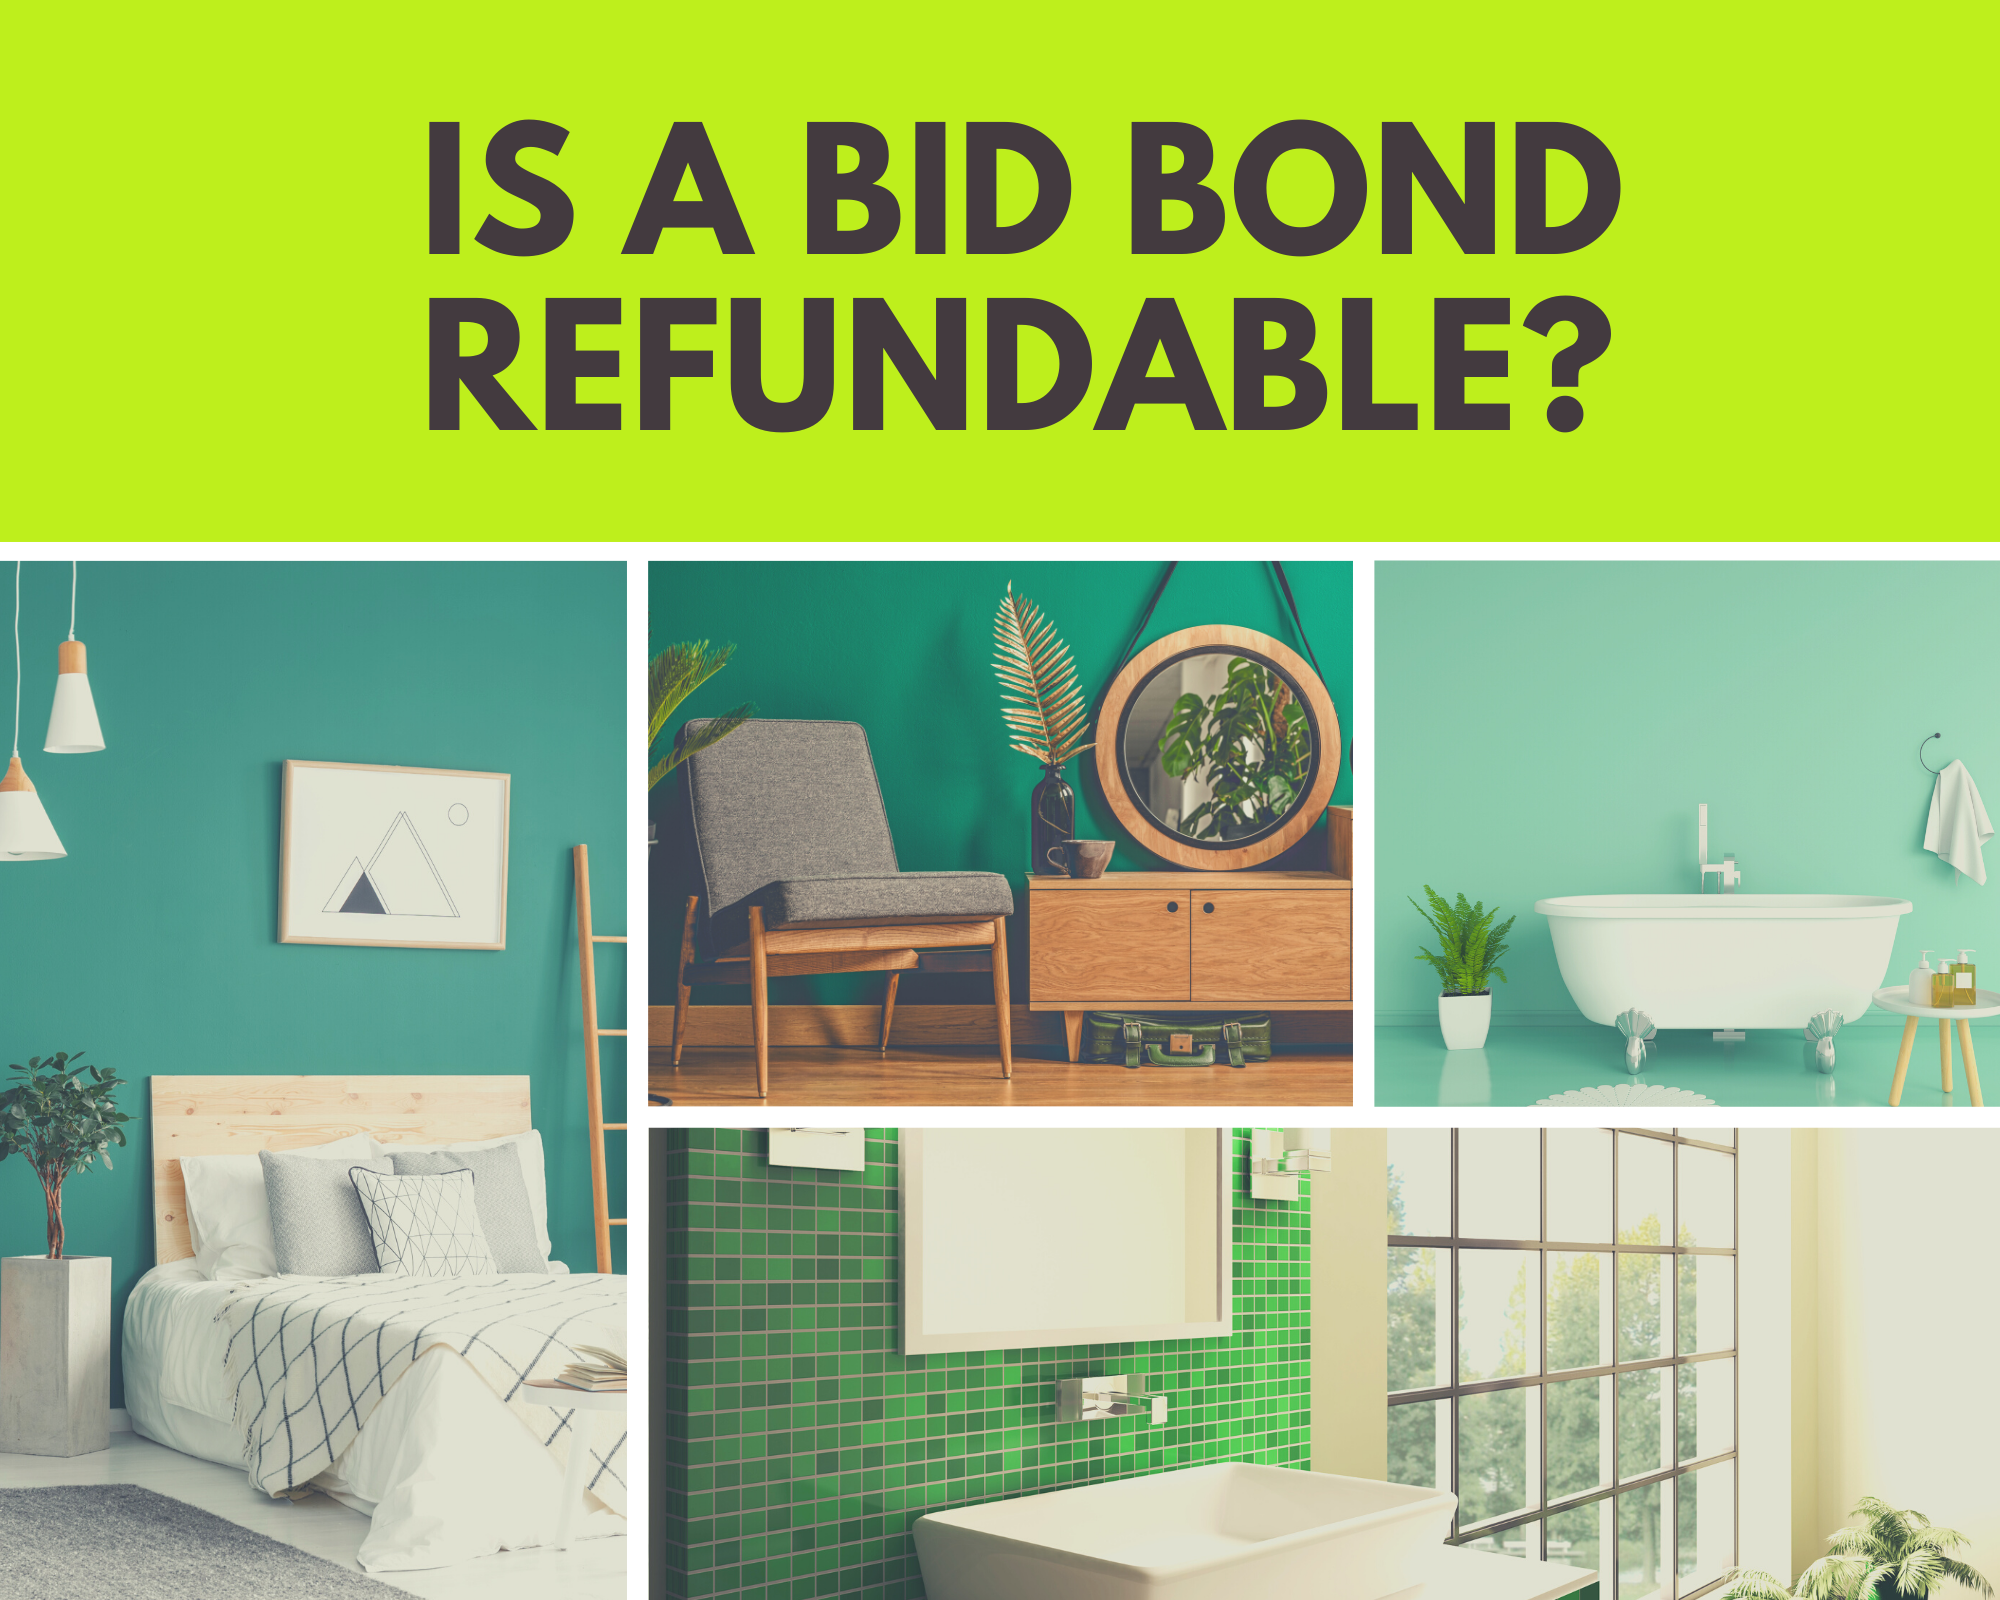 bid bonds - can I get a refund from a bid bond - home interior in blue green and white